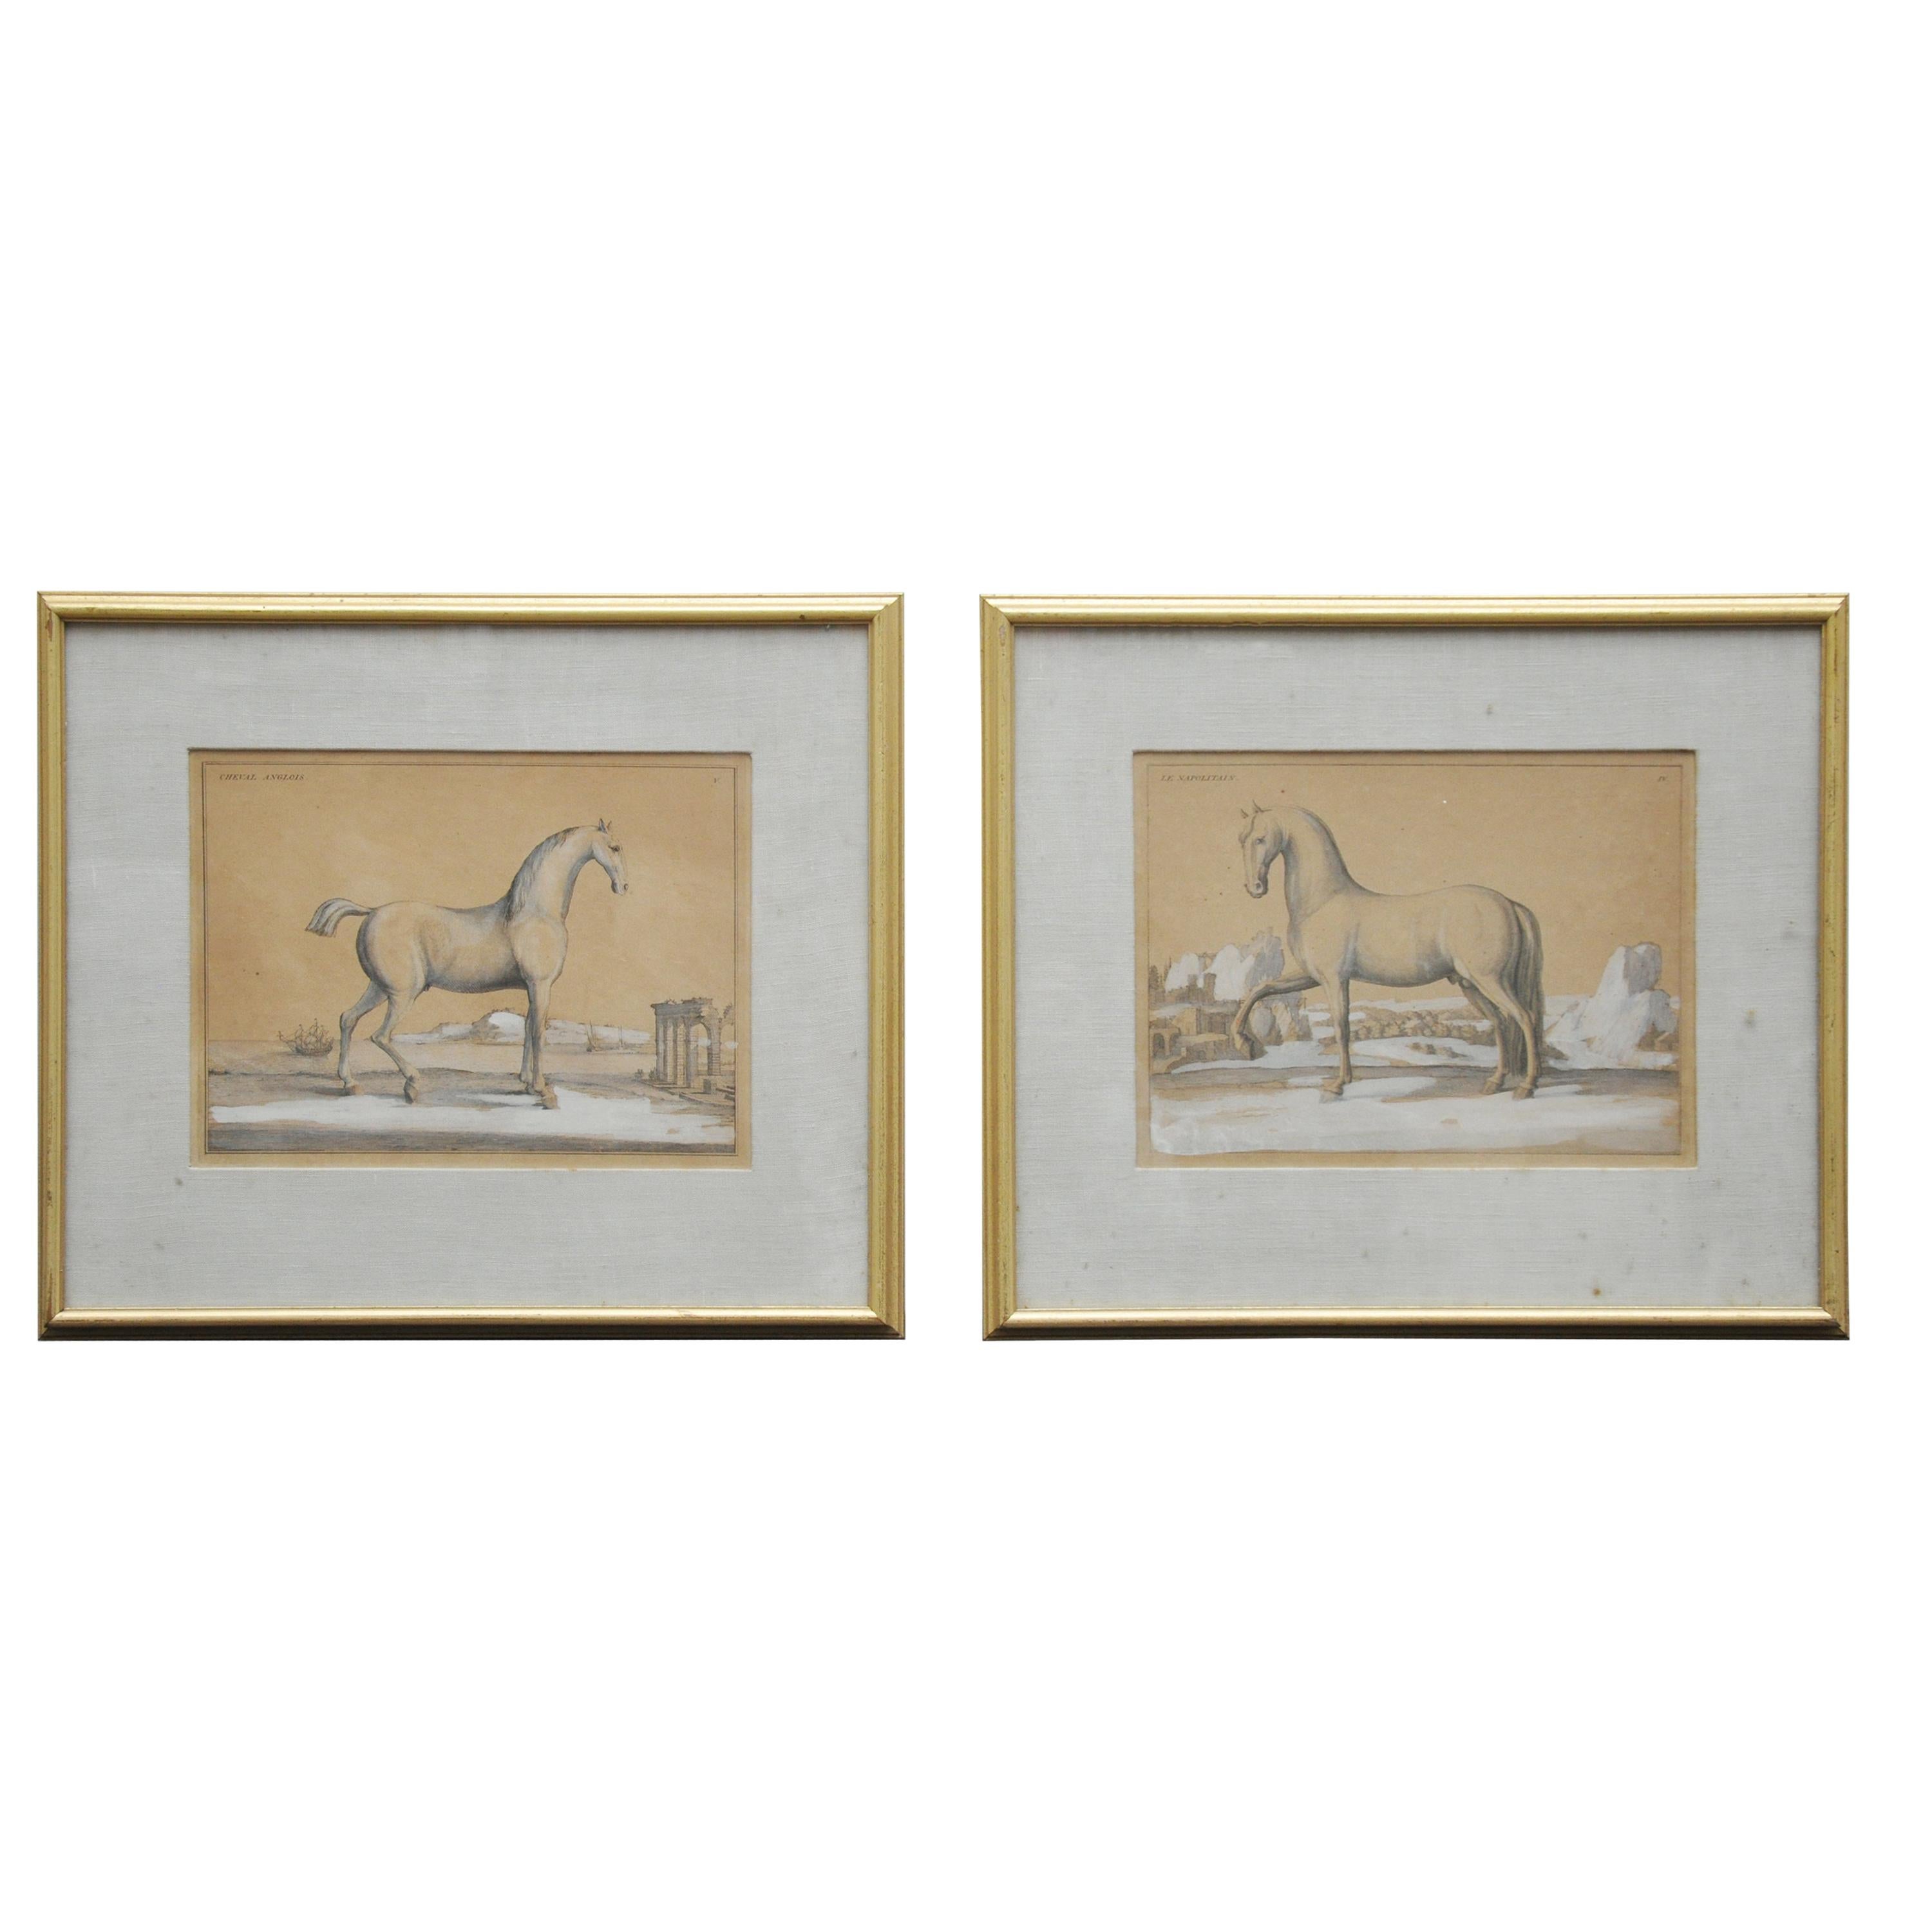 18th Century Etchings of Le Neopoltain and Cheval Anglois Horses - Set of 2 For Sale